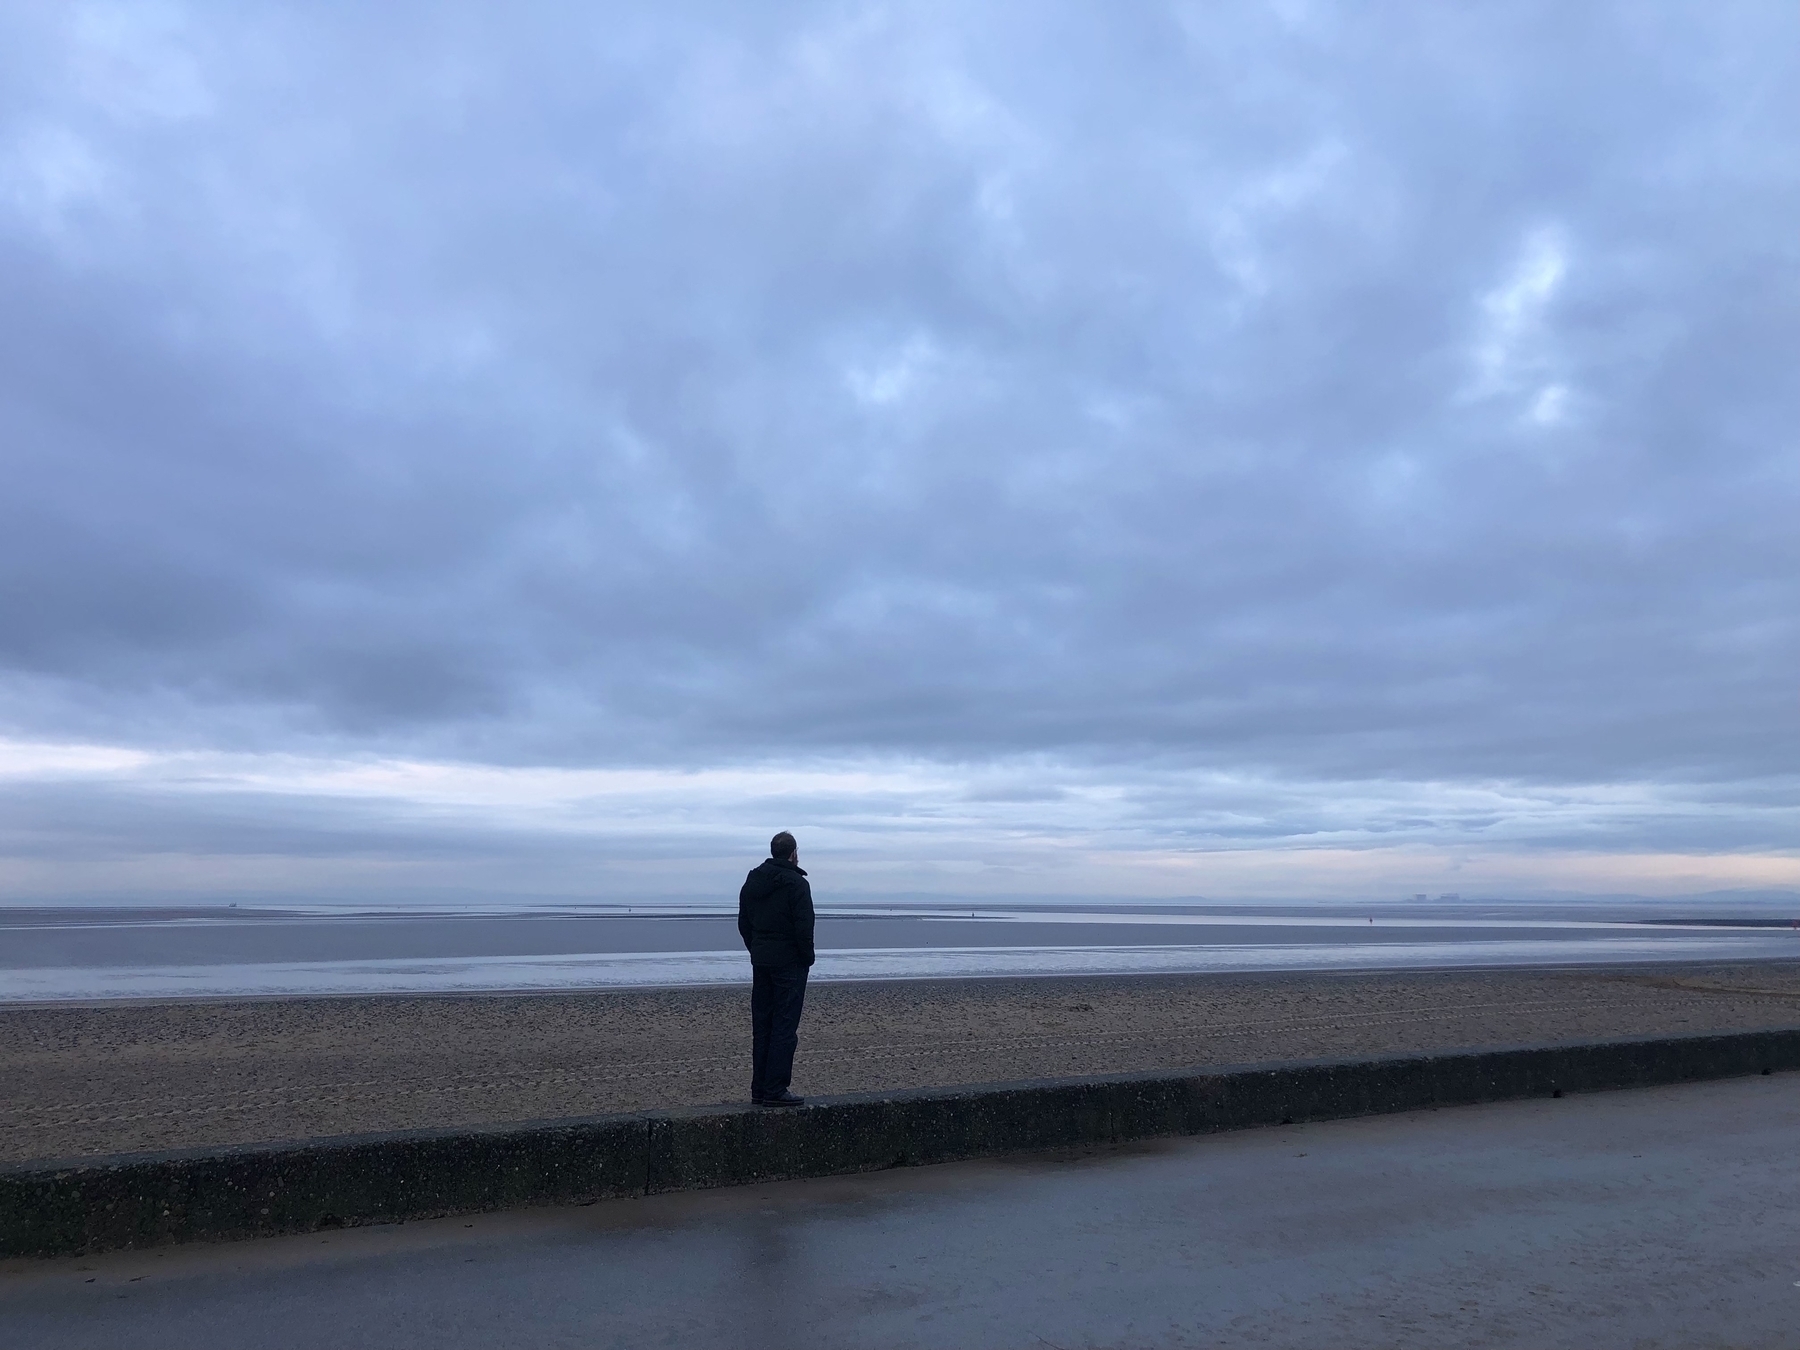 A long shot of the sea with a man standing looking out towards it